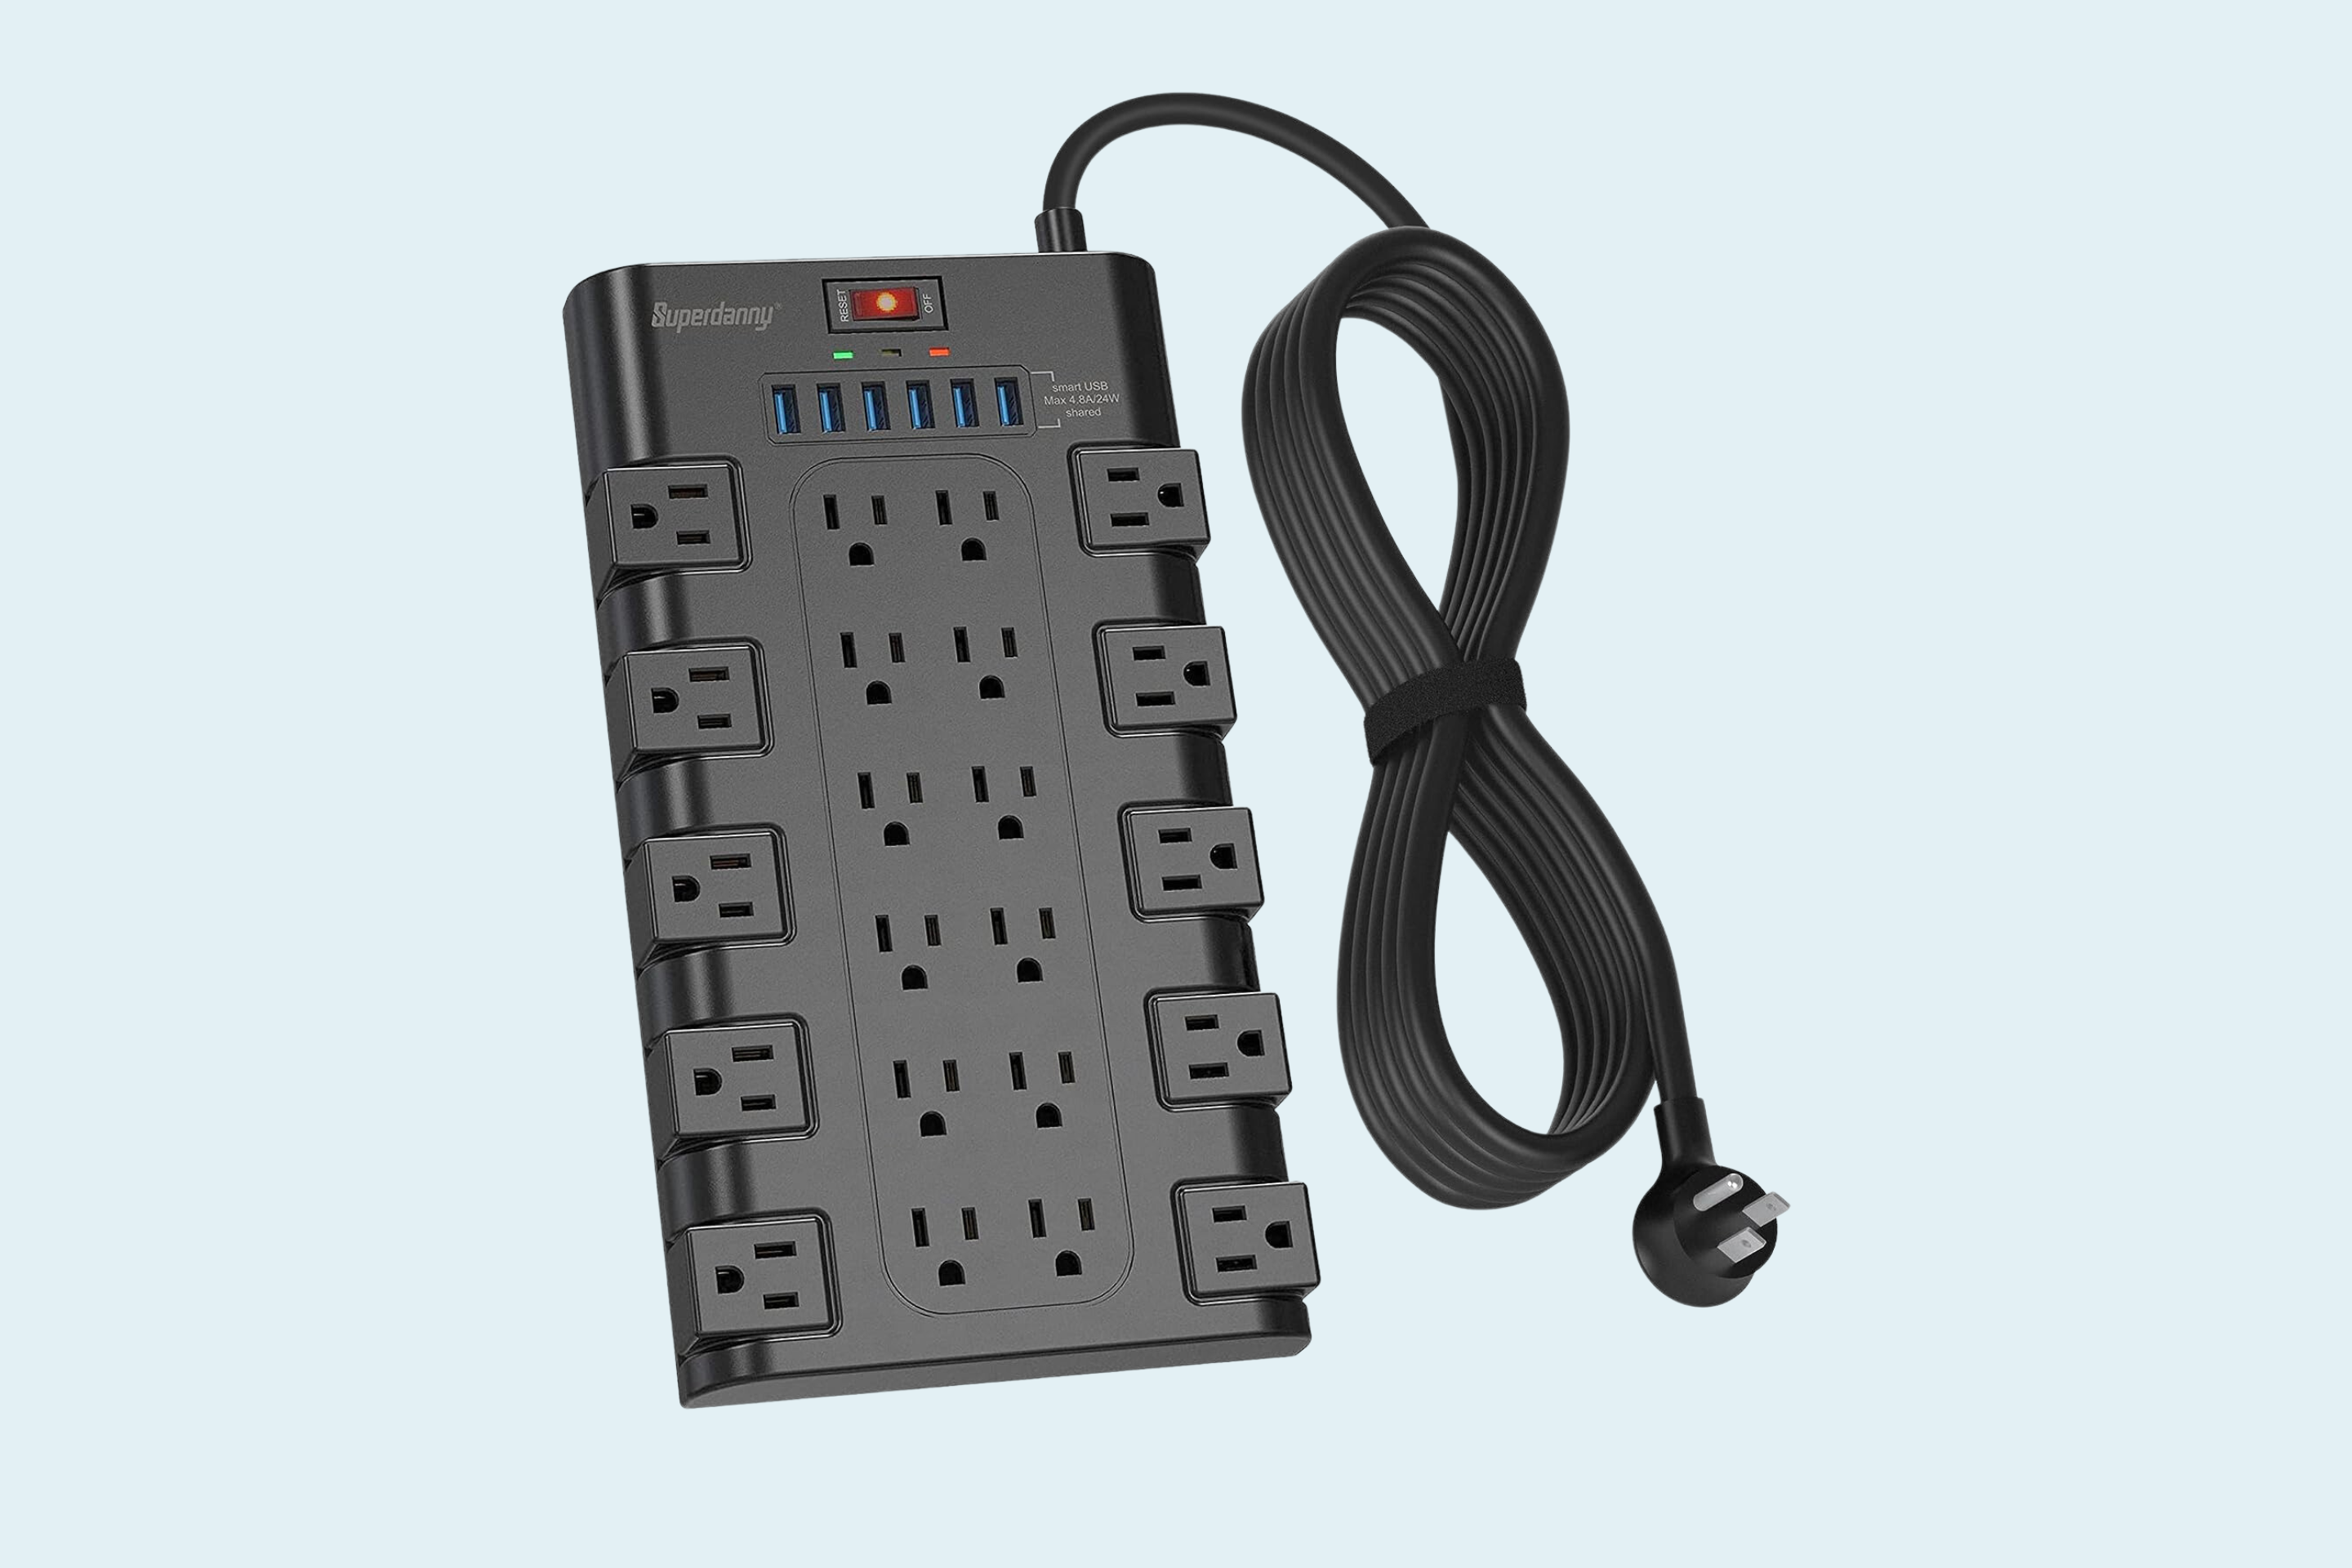 Electronic Surge Protector for Refrigerators up to 27 Cubic Feet and  Freezers